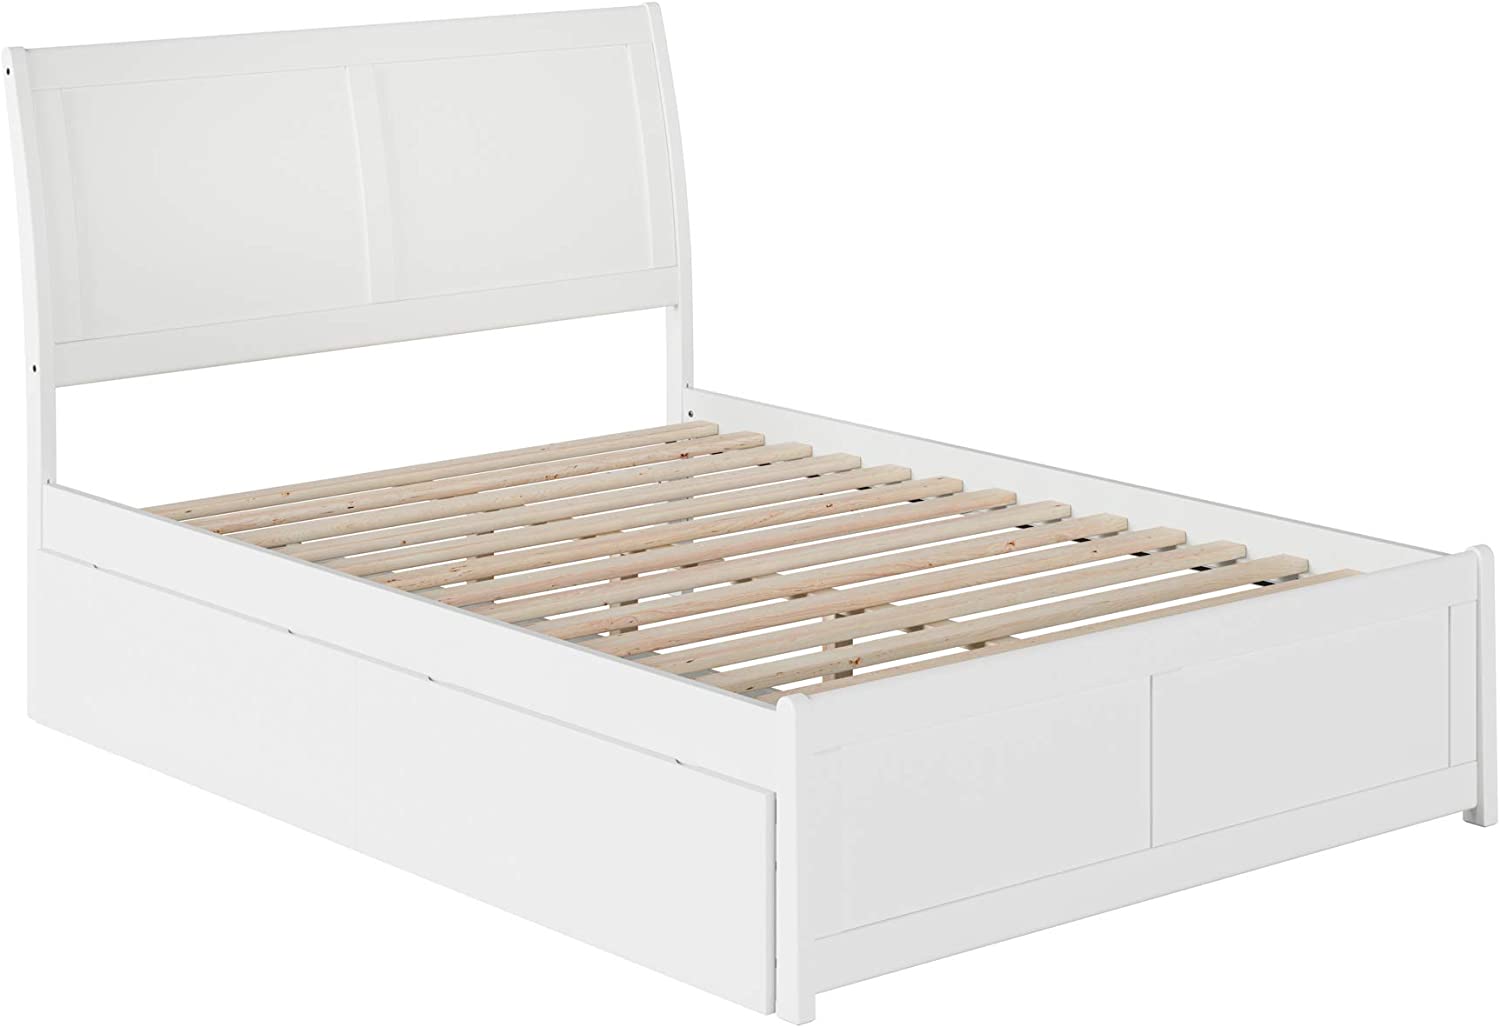 AFI Portland Platform Matching Footboard and Turbo Charger with Urban Bed Drawers, Full, White